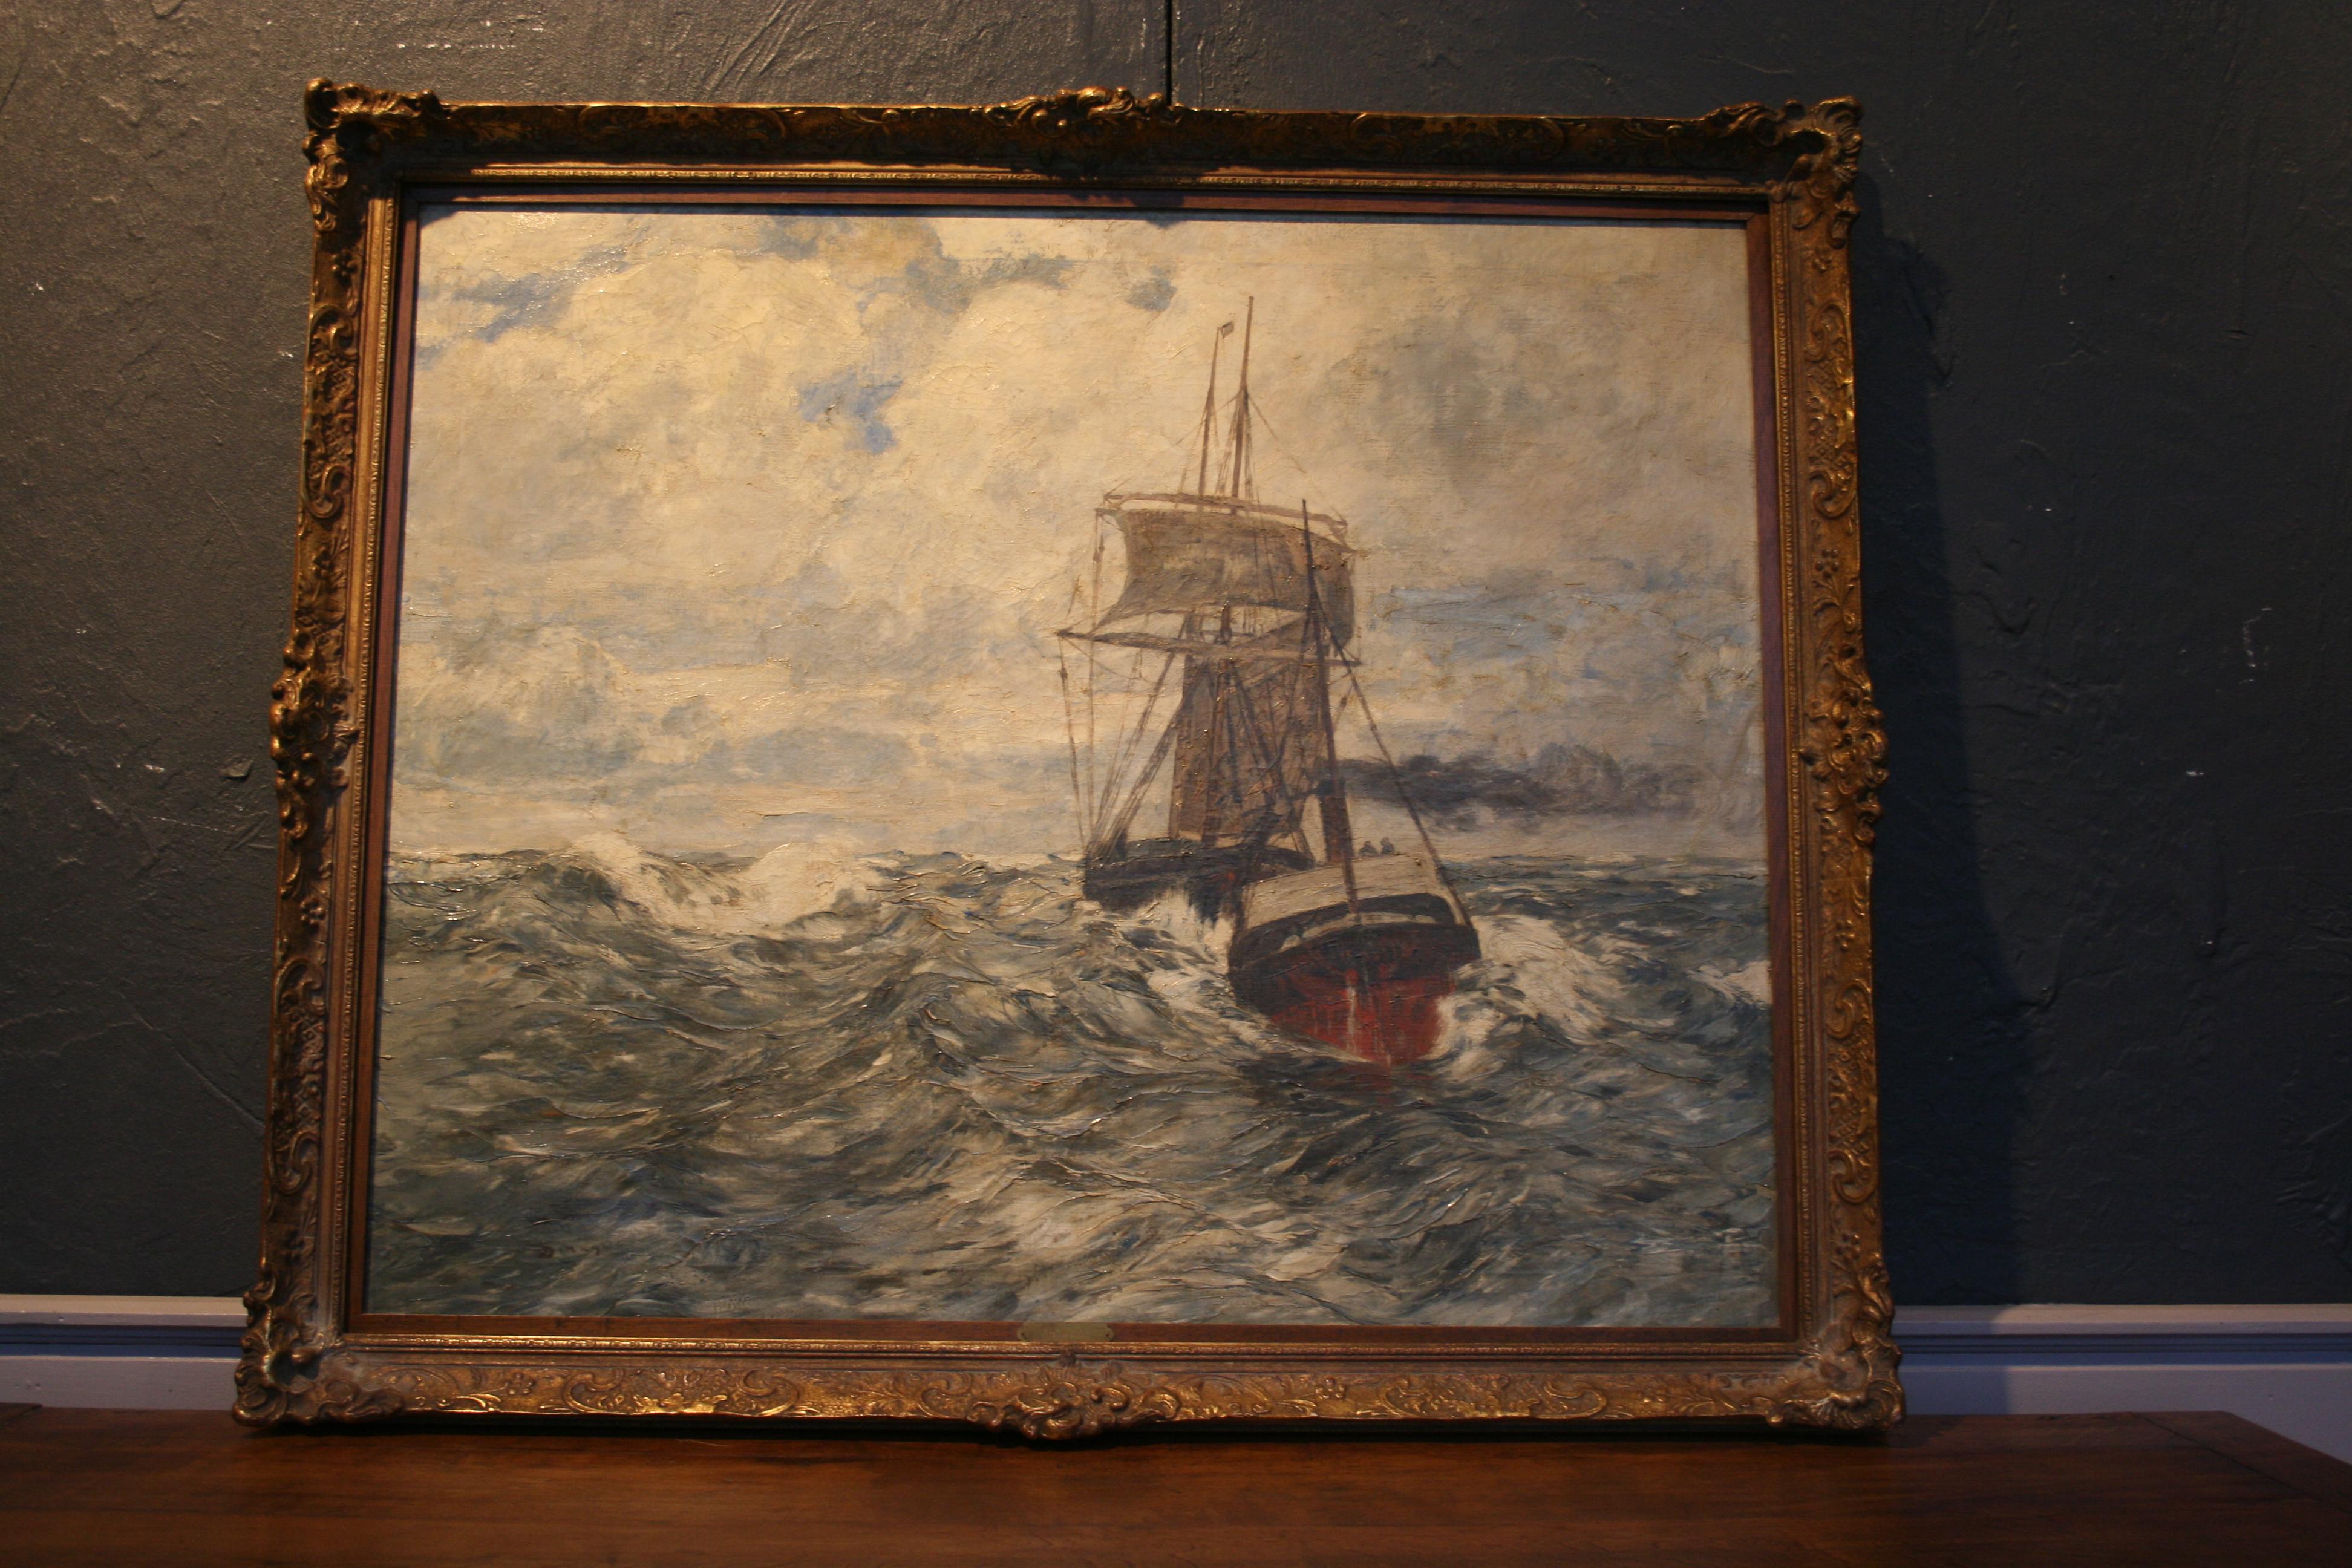 Painting Oil on Canvas, Fishing Boats On The High Seas, by Andreas Dirks 6